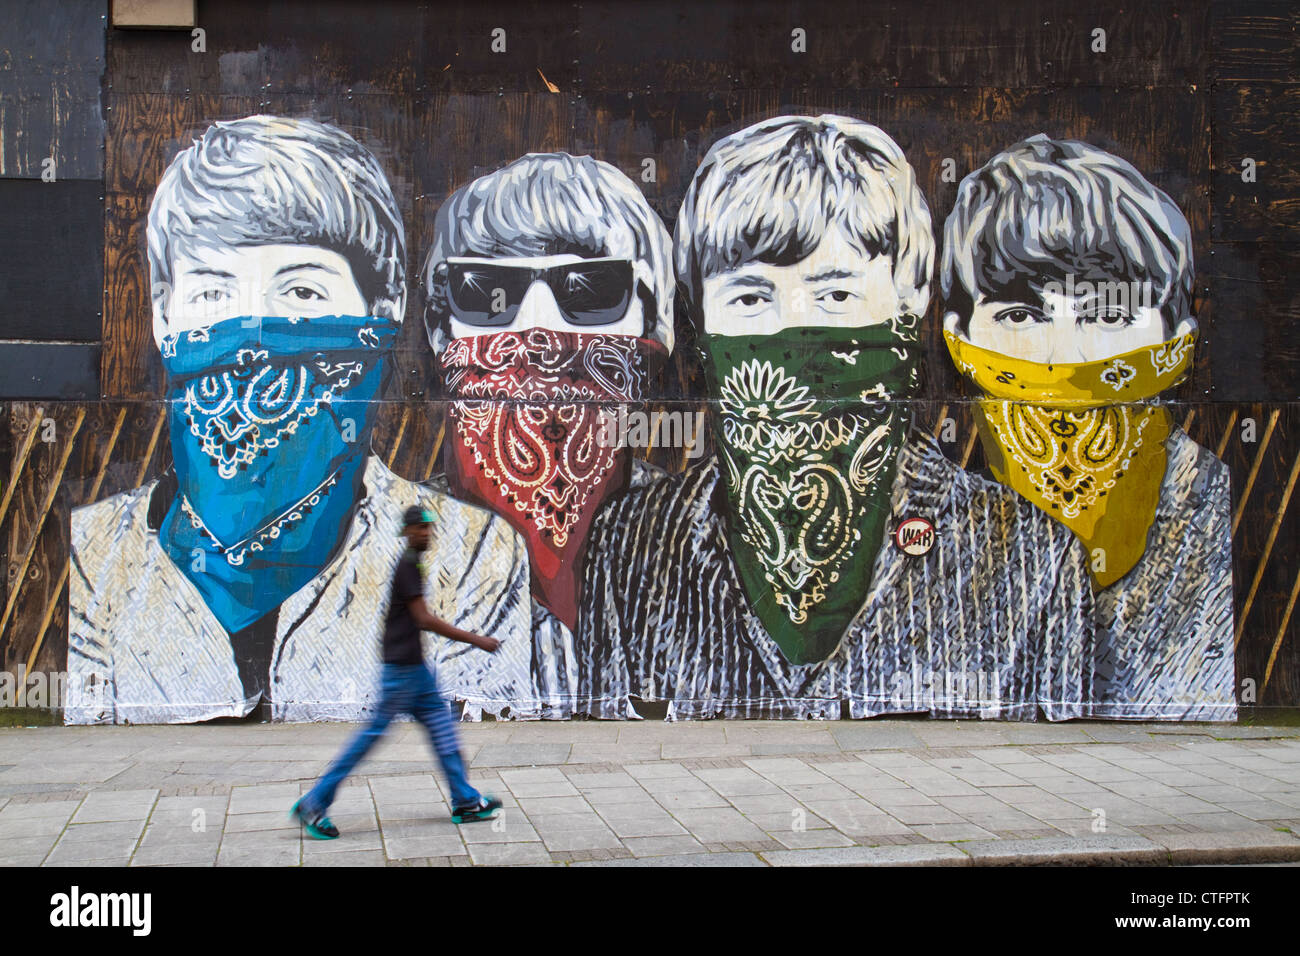 A man walks by a paste-up by street artist Mr Brainwash in London depicting The Beatles wearing face masks. Stock Photo